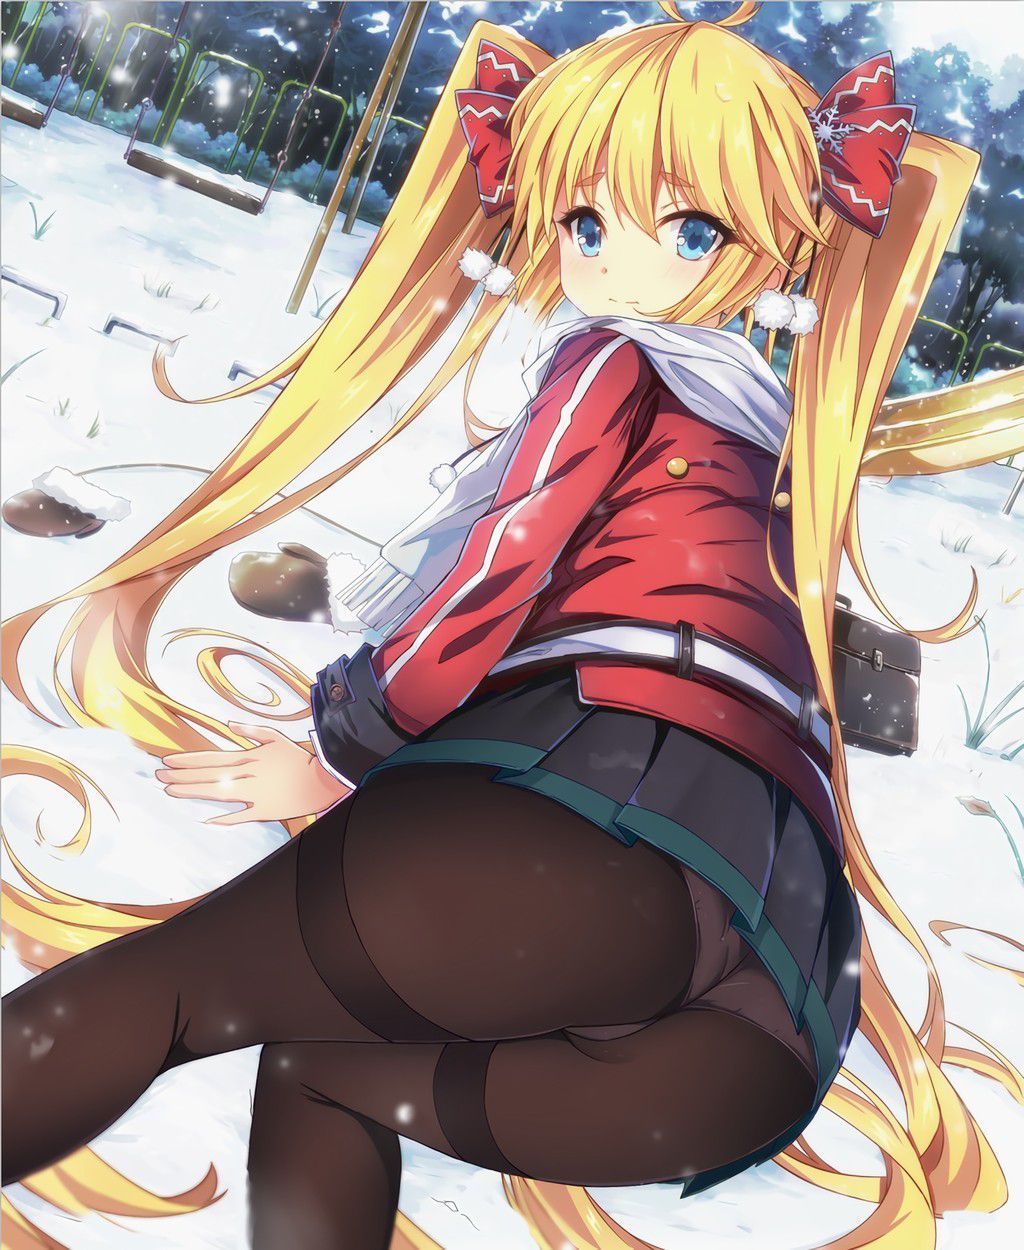 【Stockings】Give me an image of a beautiful girl wearing stockings that are more attractive than adult 5